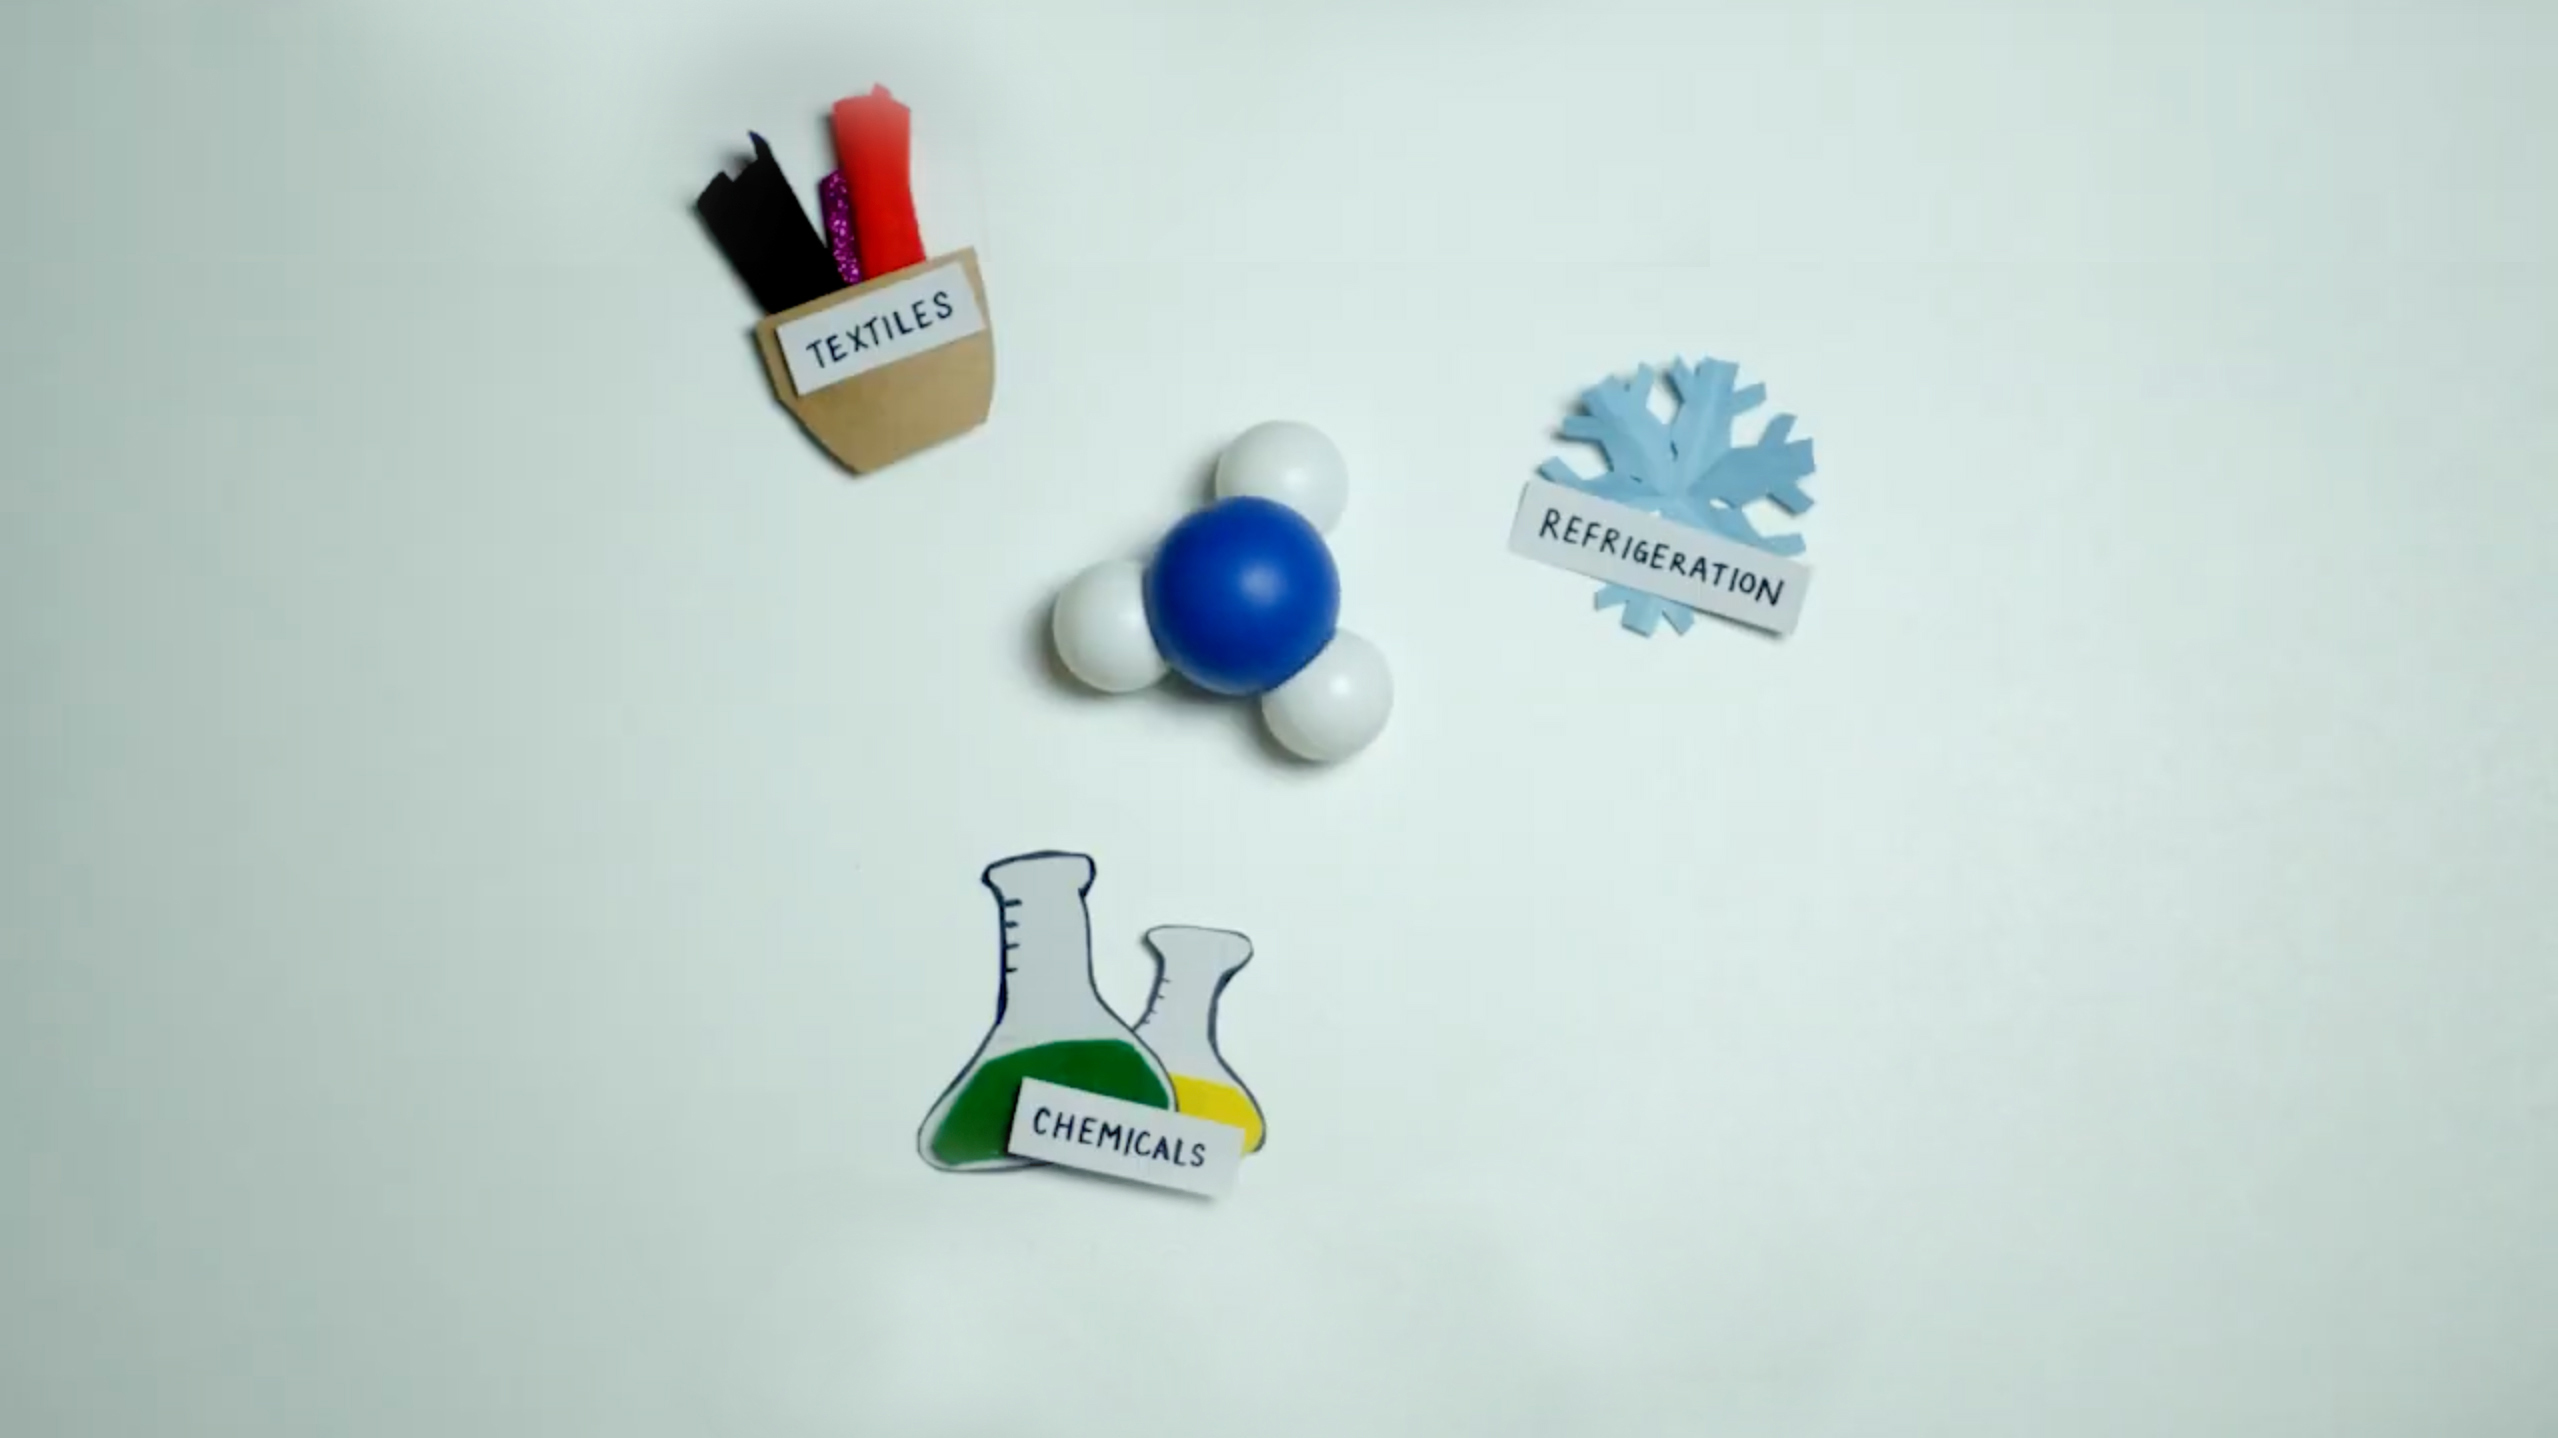 Four crafty objects laid on a table. An ammonia molecule surrounded by test tubes as chemicals, three felt rolls as textiles, and a snowflake as refrigeration.